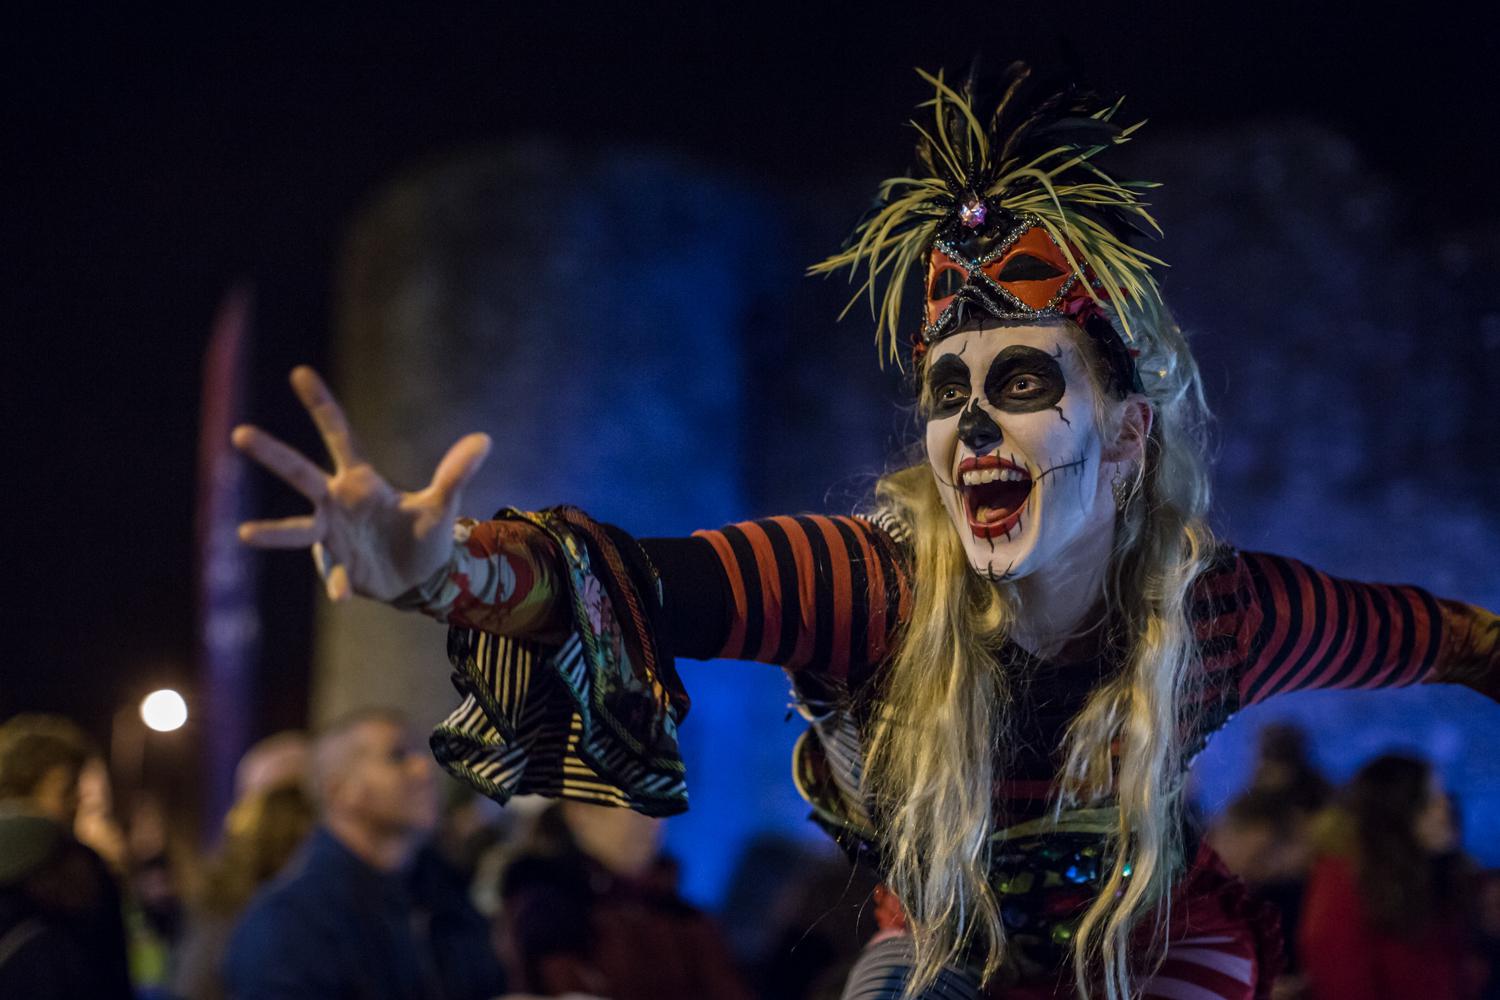 Halloween: A podcast about the ancient Celtic festival from Turismo Irish

